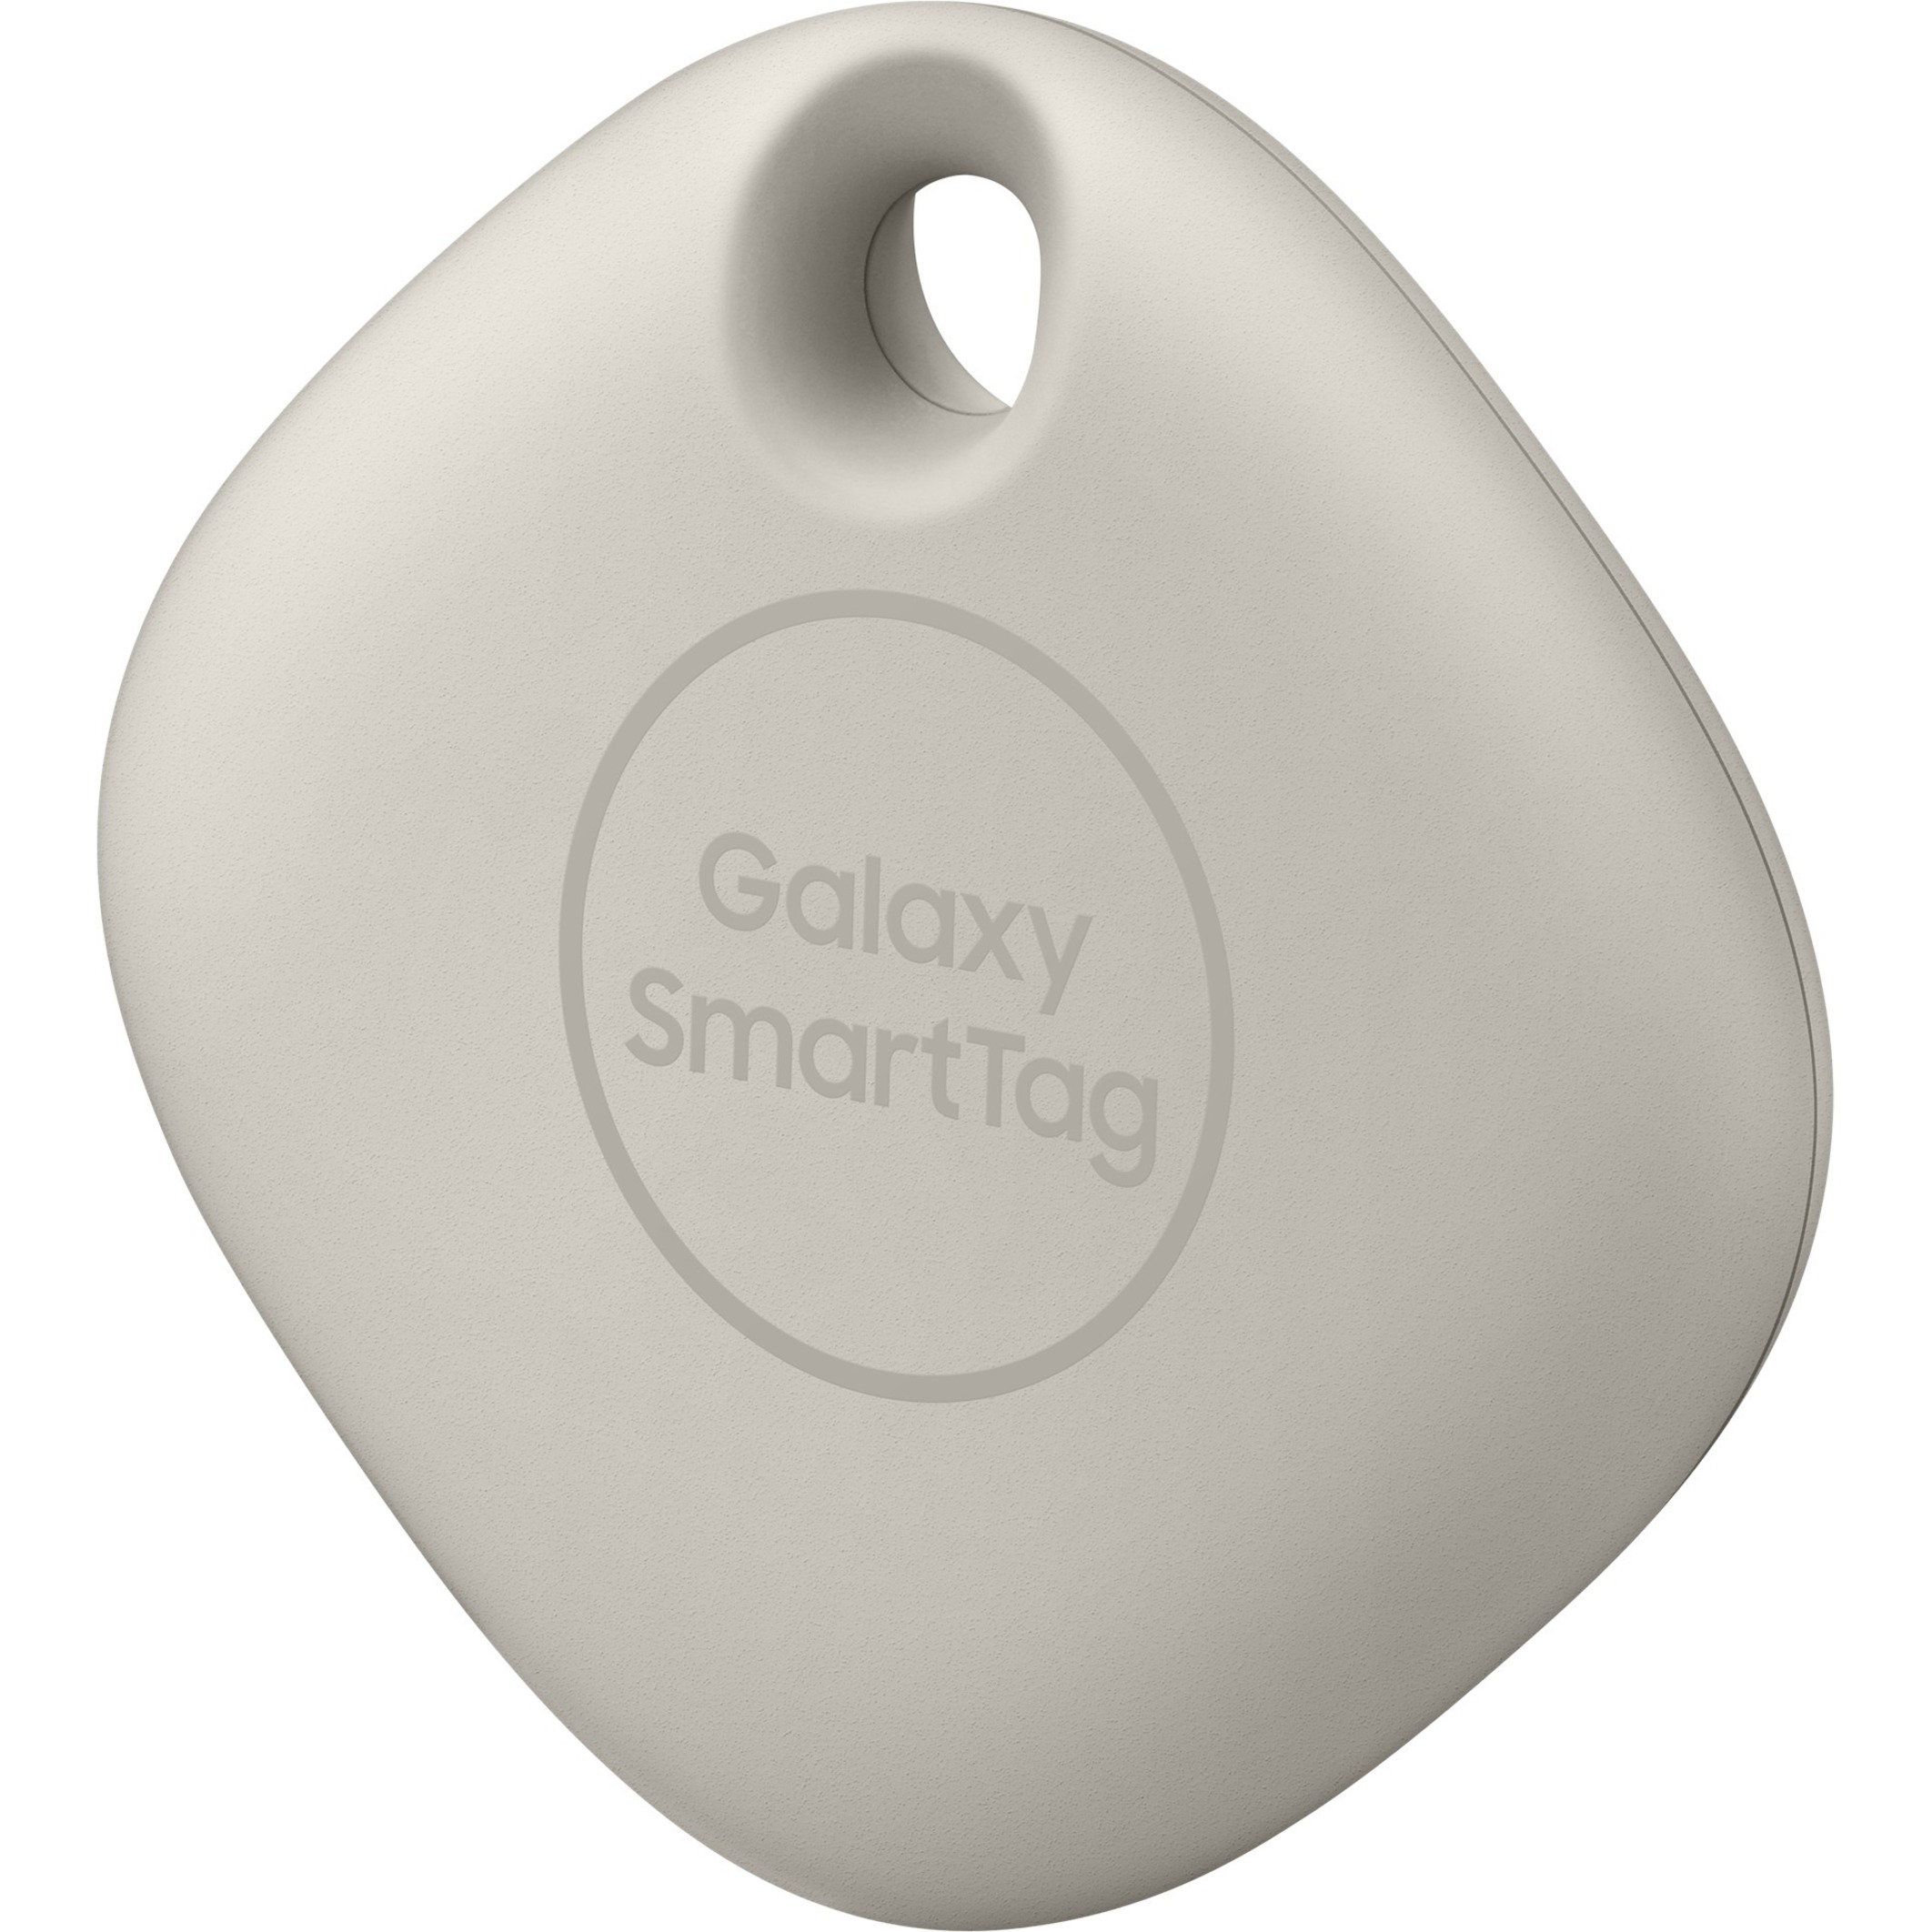 Samsung Galaxy SmartTag, 1-Pack, Oatmeal - image 3 of 8